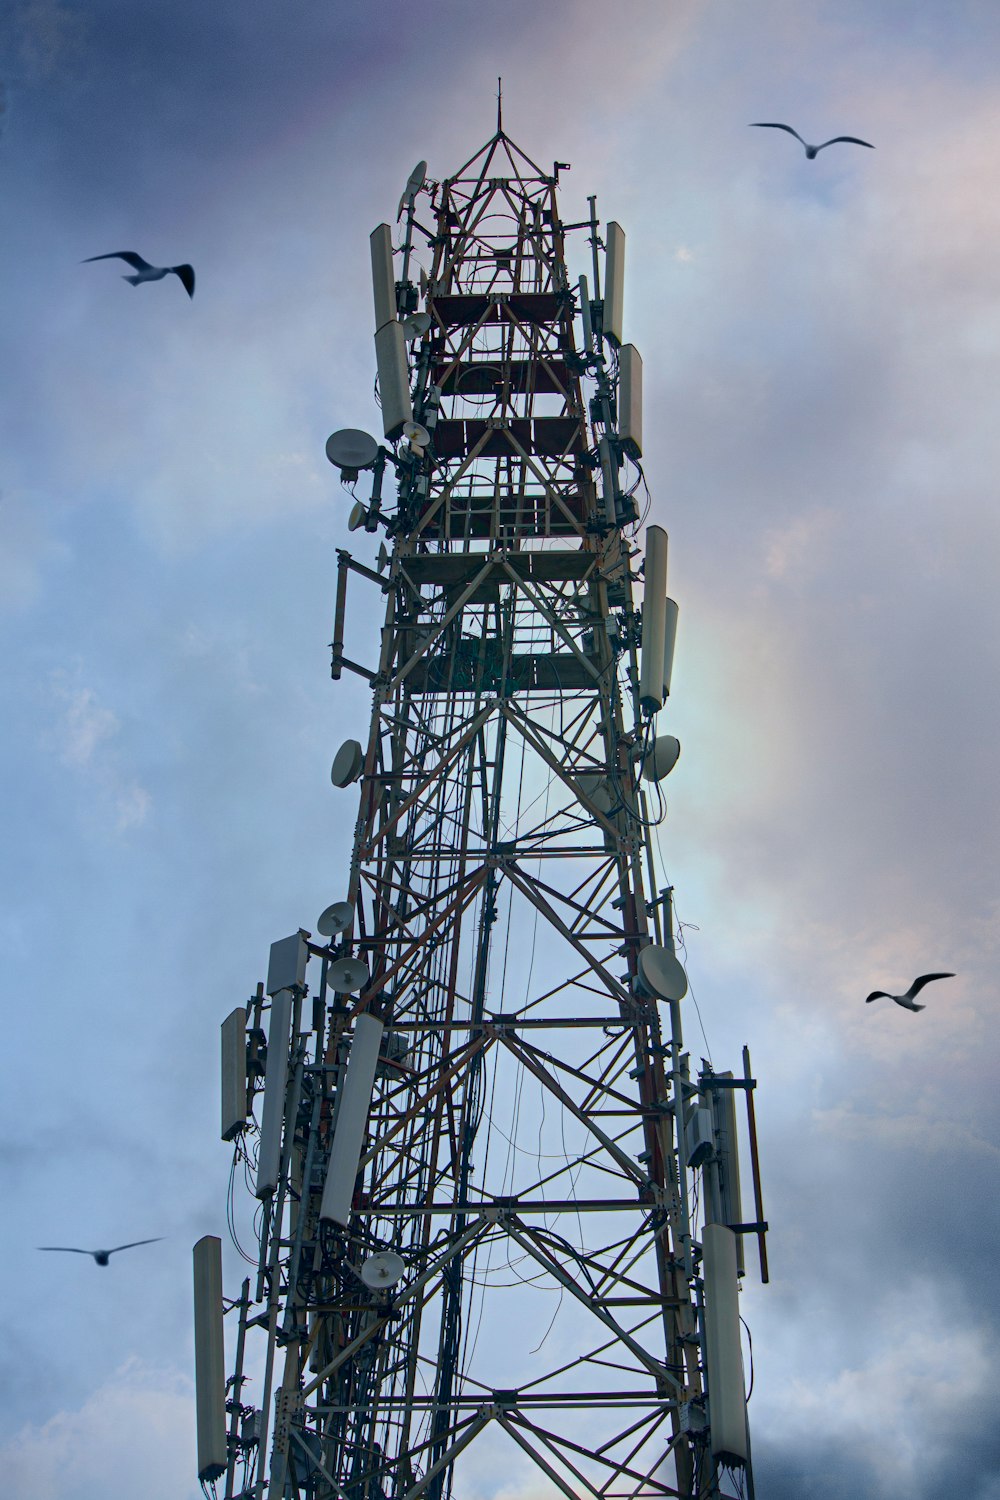 a tall tower with lots of antennas on top of it